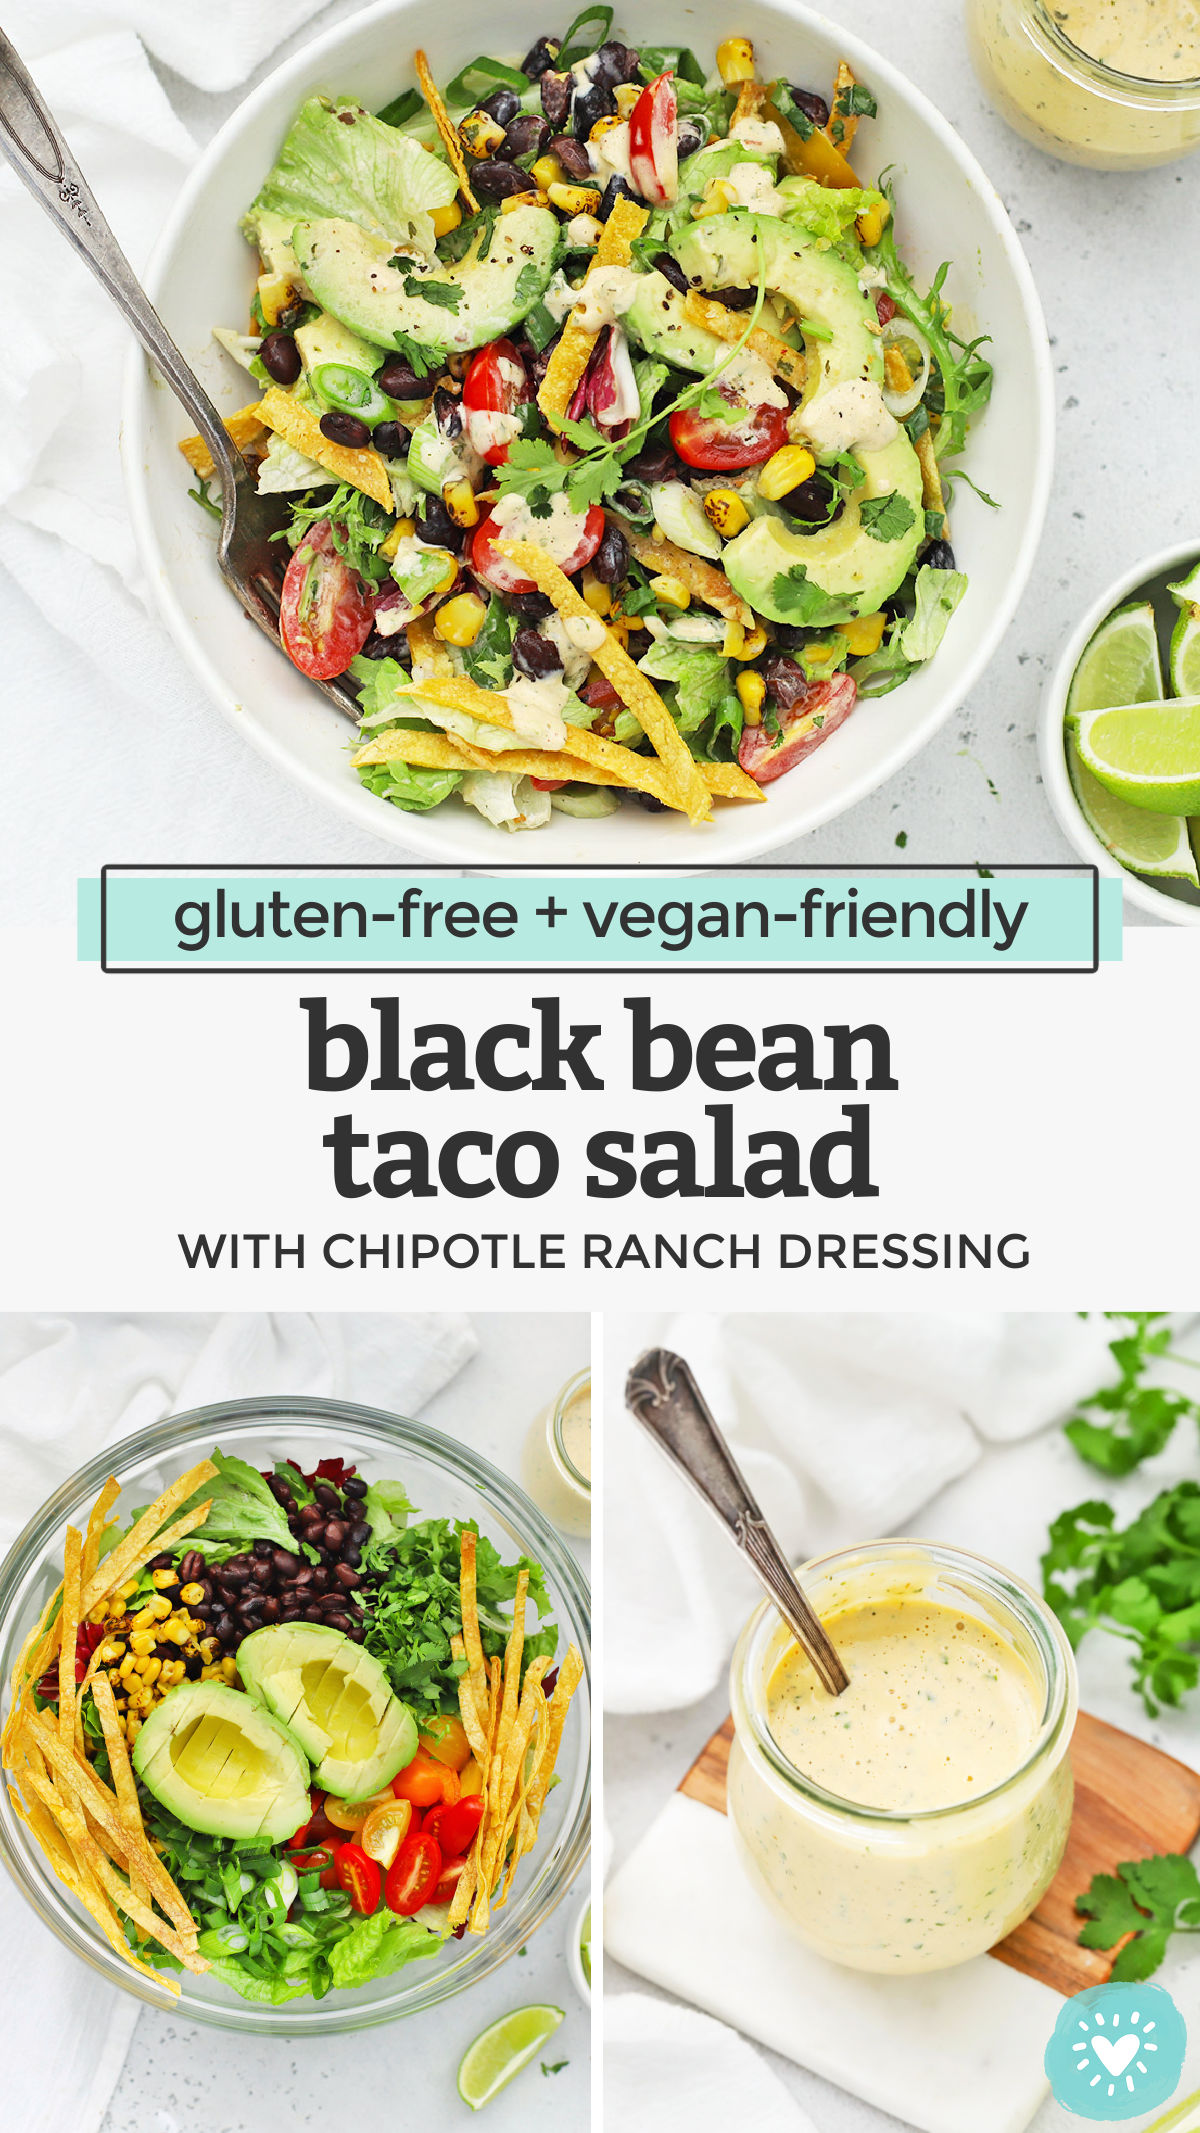 Black Bean Taco Salad - A gorgeous vegetarian taco salad with colorful veggies and a creamy dressing that'll keep you coming back for more! (Gluten-Free, Vegan-Friendly) // Vegan Taco Salad // Meatless Monday // Vegan Dinner // Healthy Dinner // Vegetarian Dinner #glutenfree #vegan #tacosalad #vegetarian #healthydinner